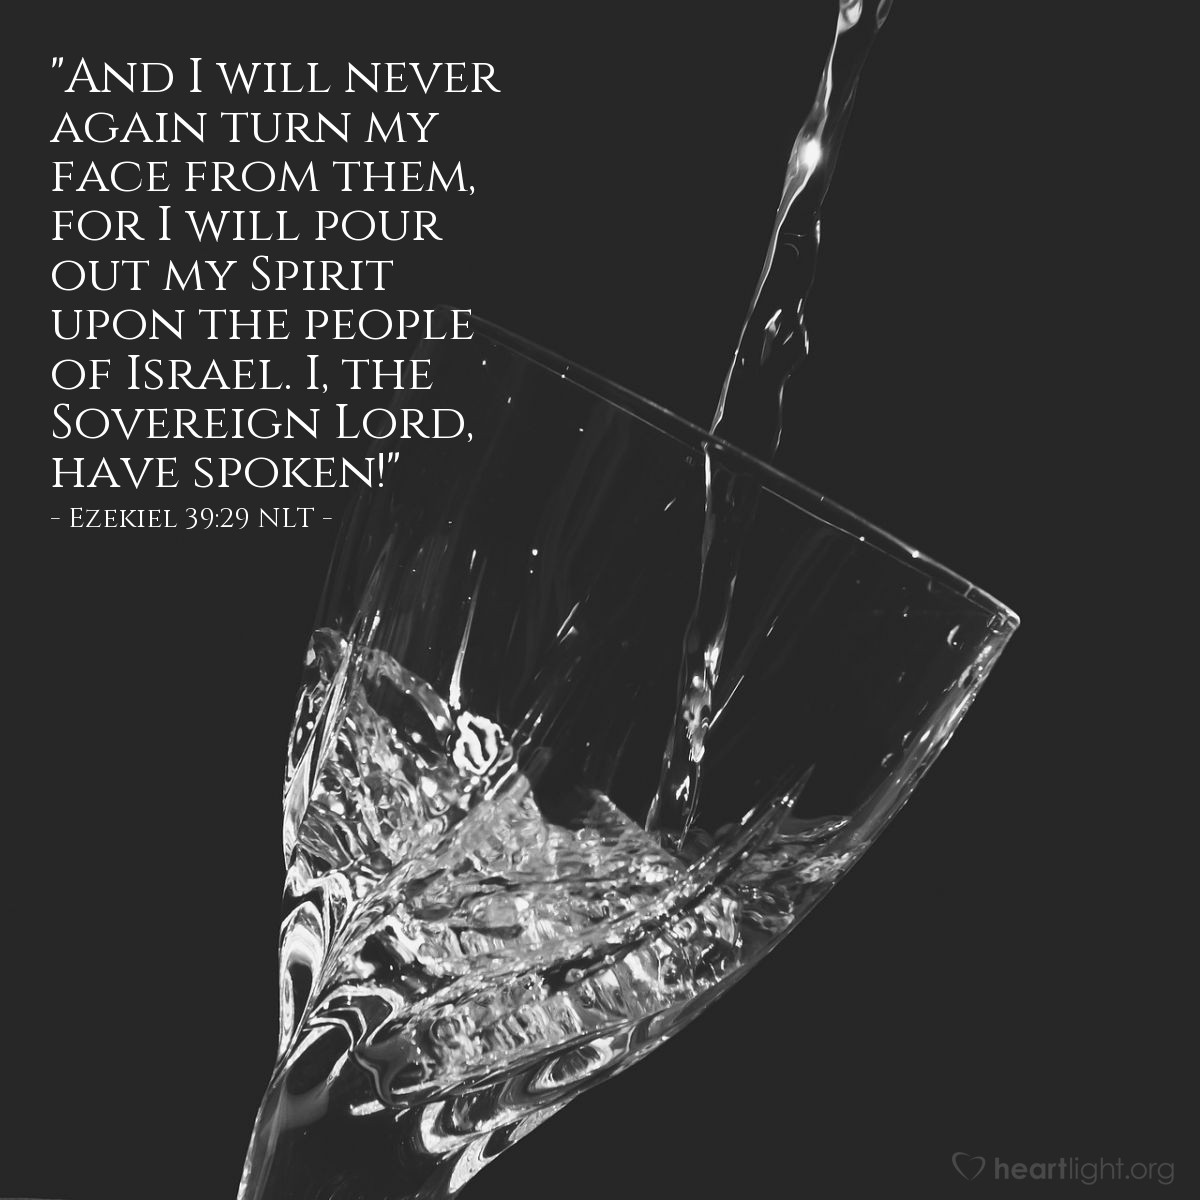 Illustration of Ezekiel 39:29 NLT — "And I will never again turn my face from them, for I will pour out my Spirit upon the people of Israel. I, the Sovereign Lord, have spoken!"